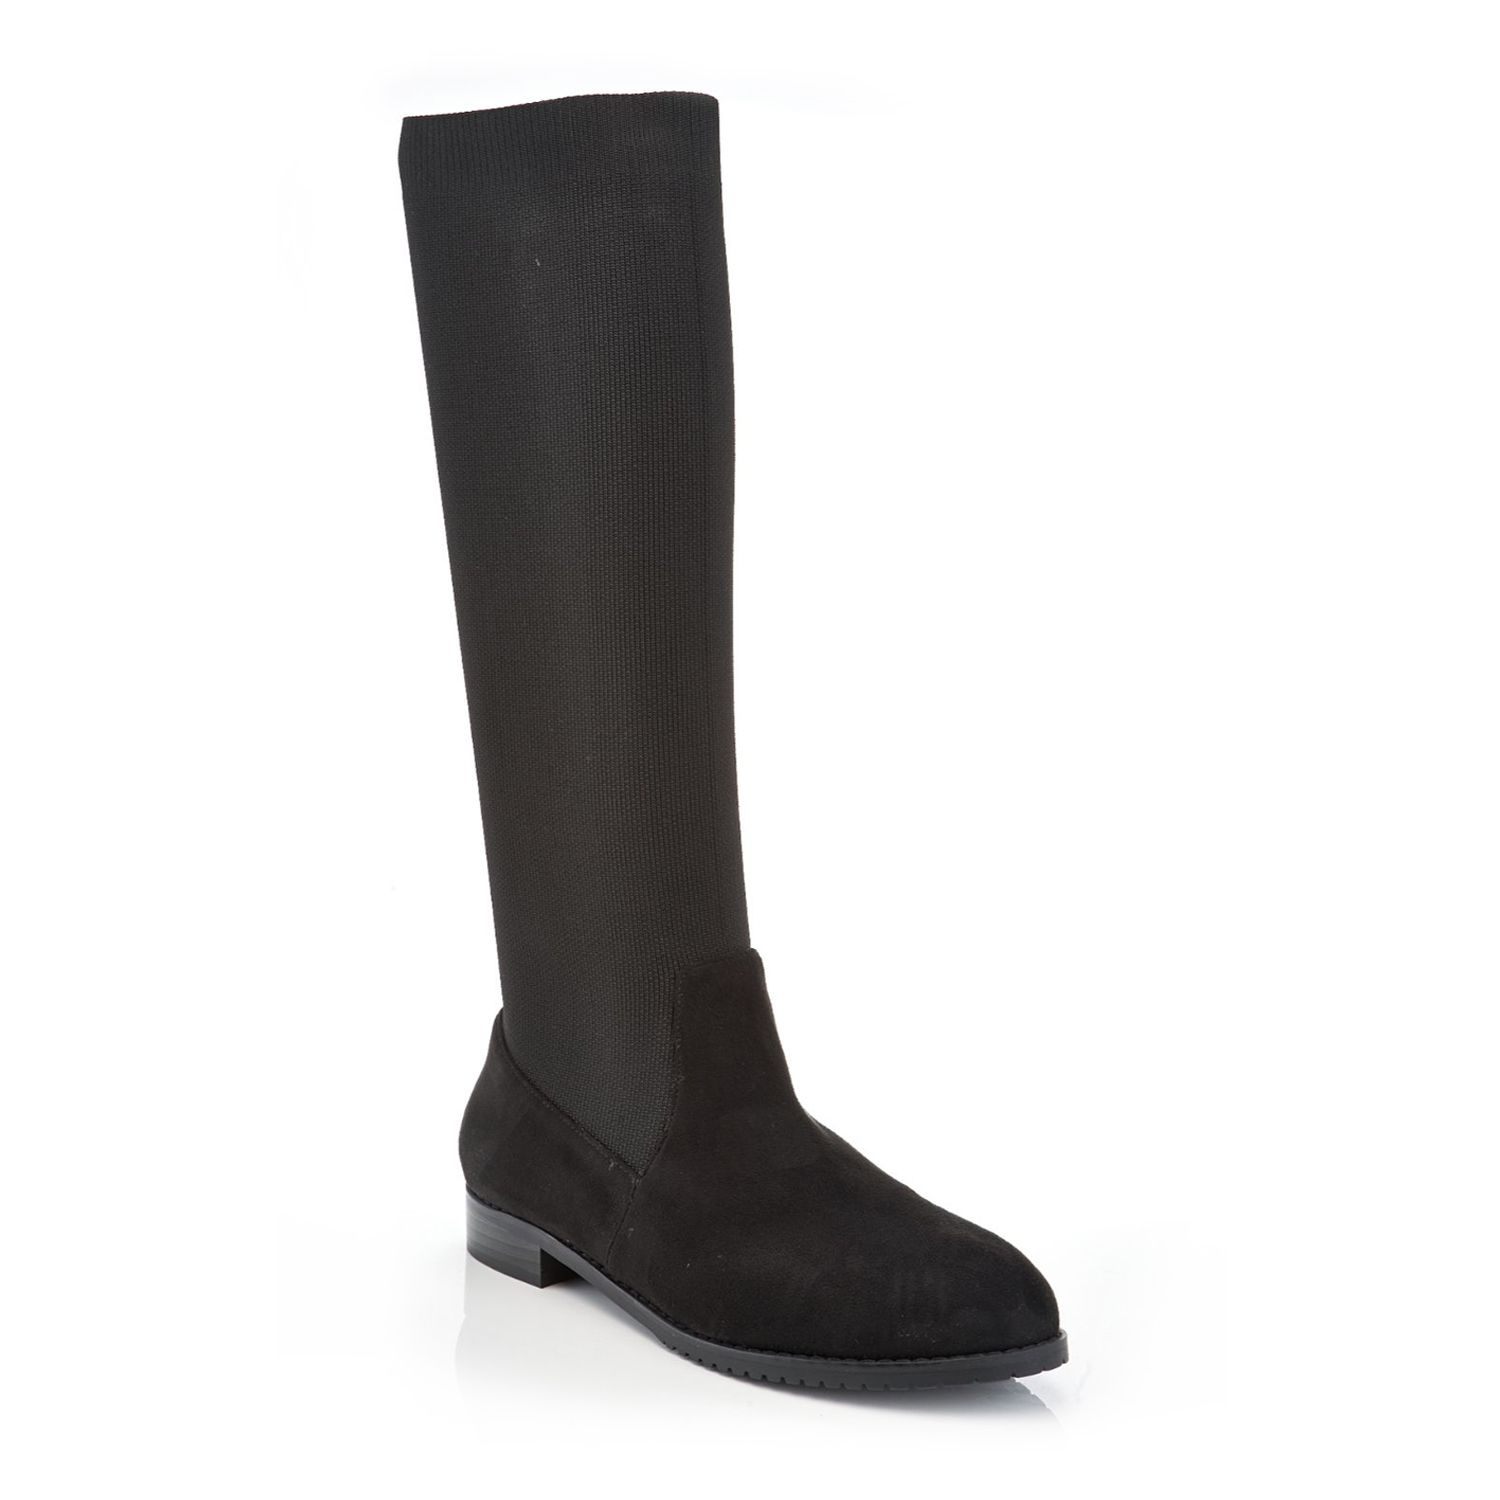 Image for Henry Ferrera Andrew Suede Style Women's Rain Boots at Kohl's.